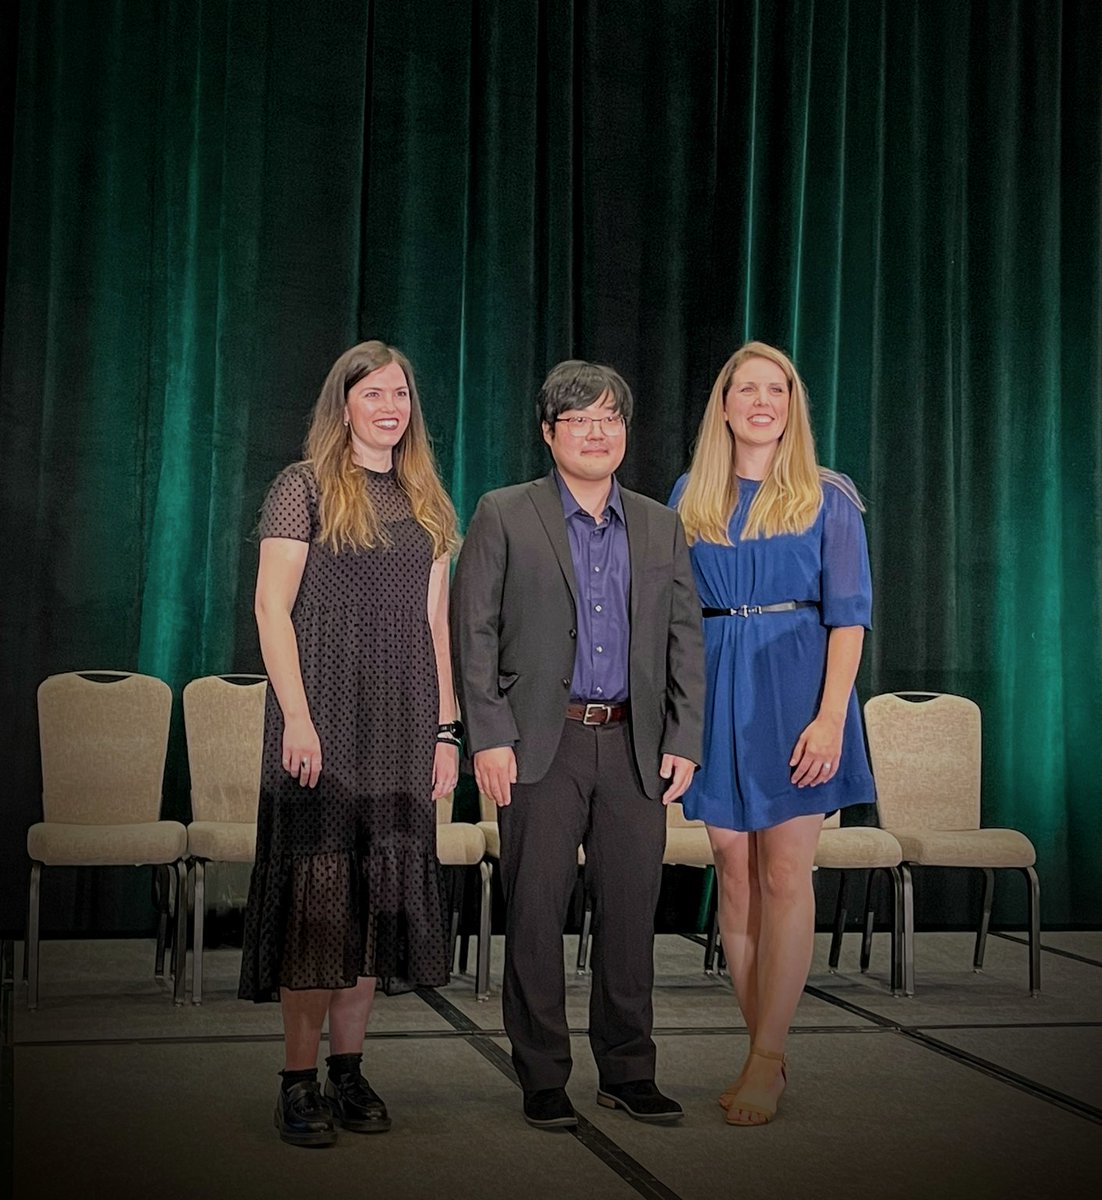 I am honored to have been selected as one of the recipients of the AACR John and Elizabeth Leonard Family Foundation Scholar-in-training award #AACR22